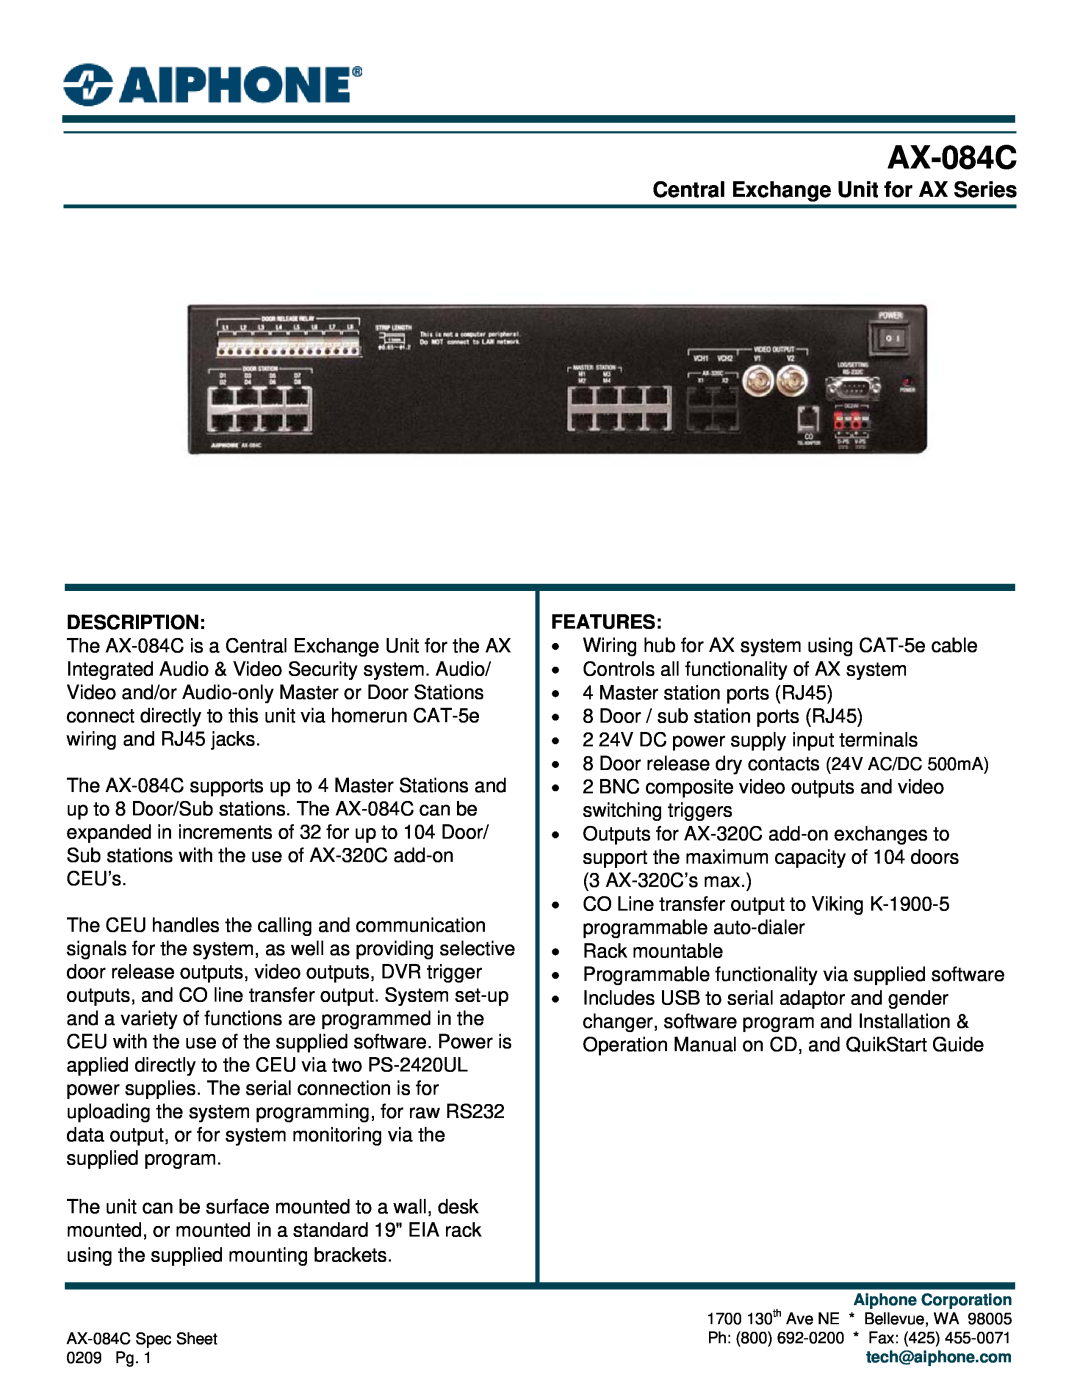 Aiphone AX-084C operation manual Central Exchange Unit for AX Series, Description, Features 